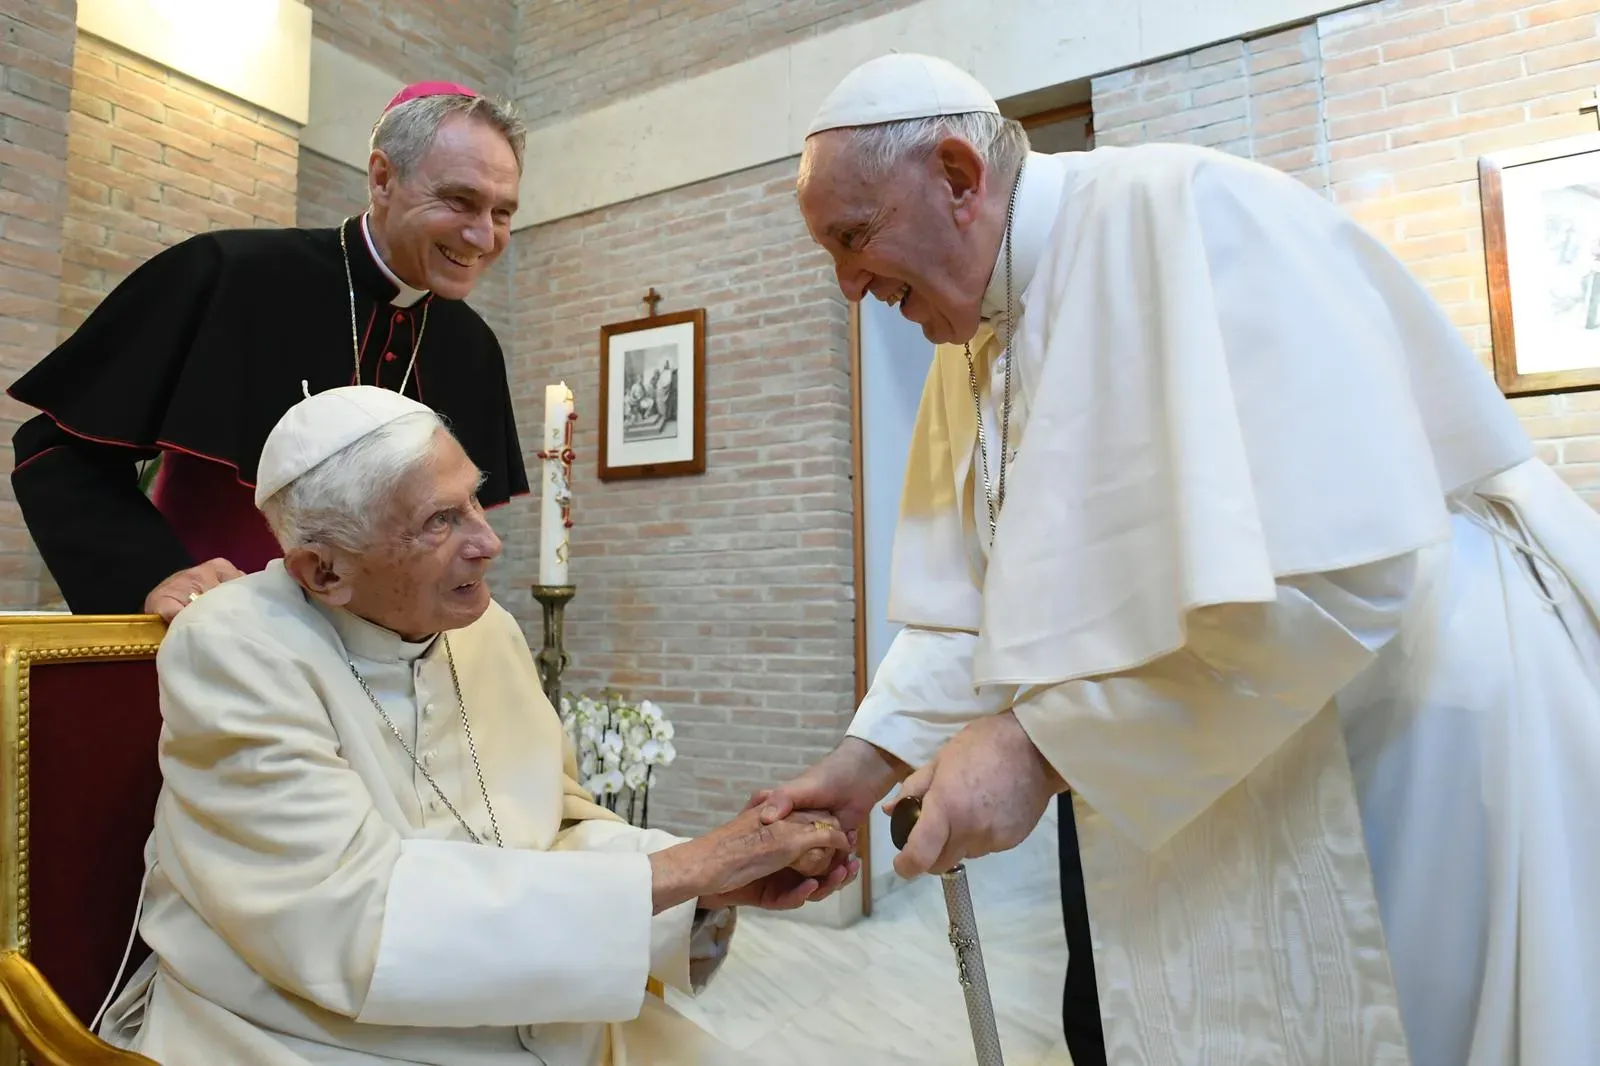 New Cardinals and Pope Francis Pay Visit to Pope Emeritus Benedict XVI